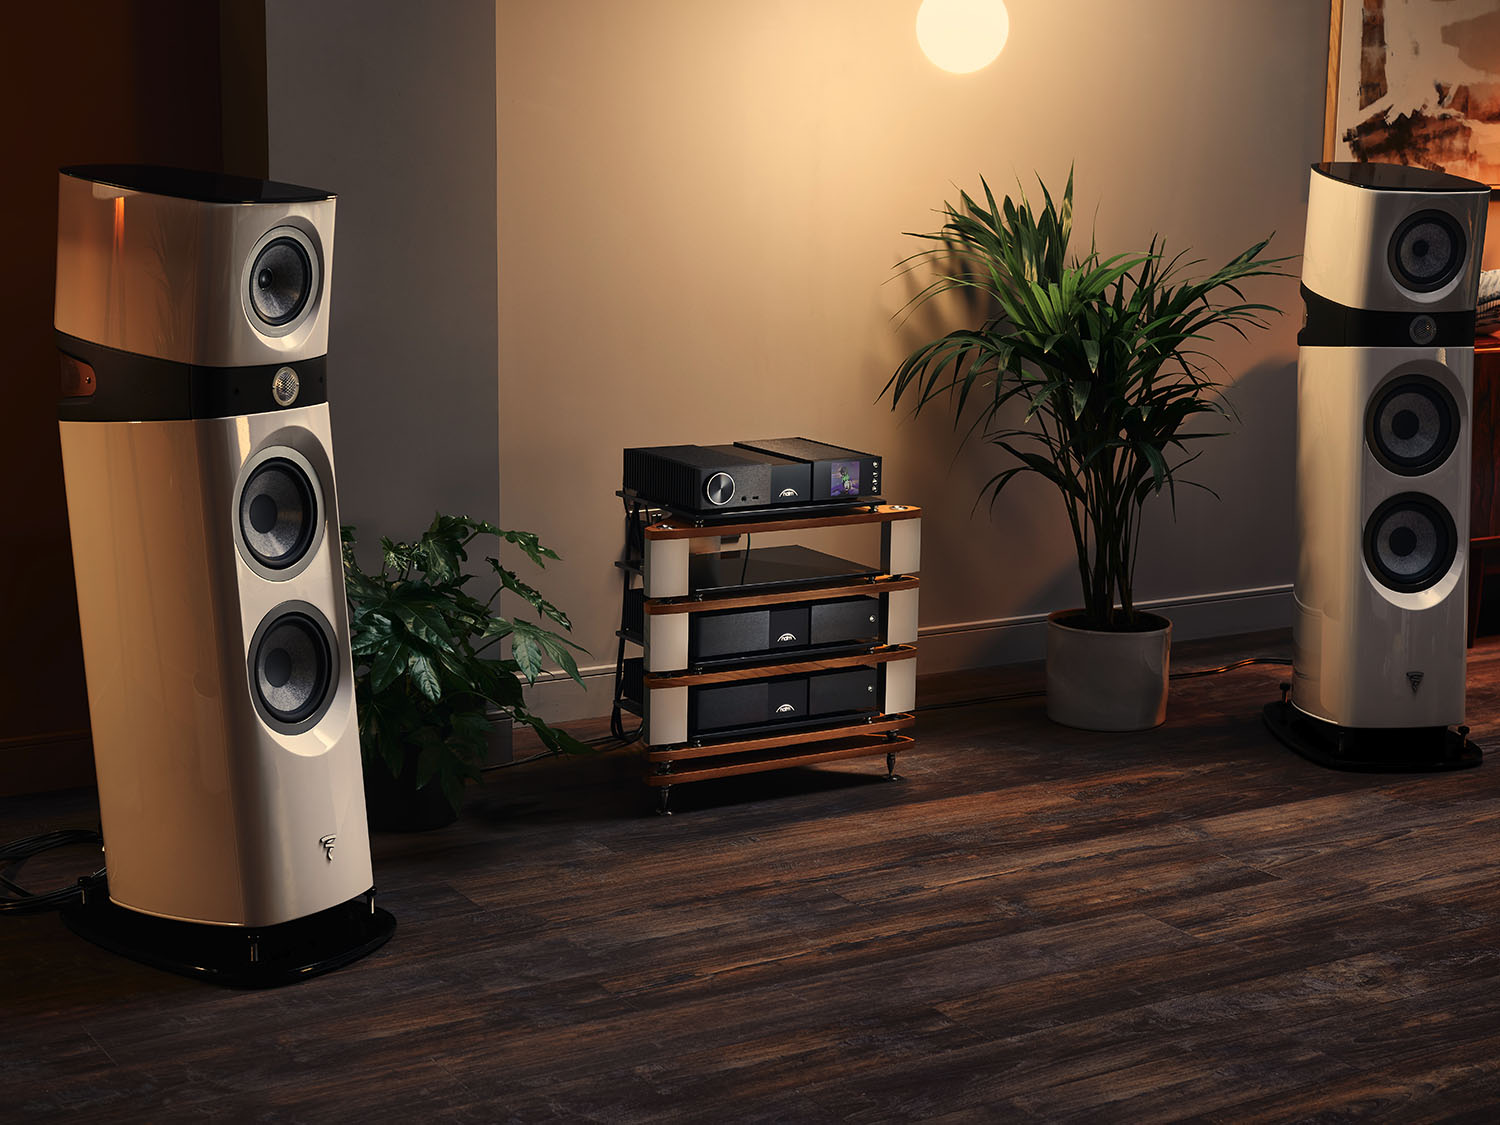 Naim Classic Series on display in home